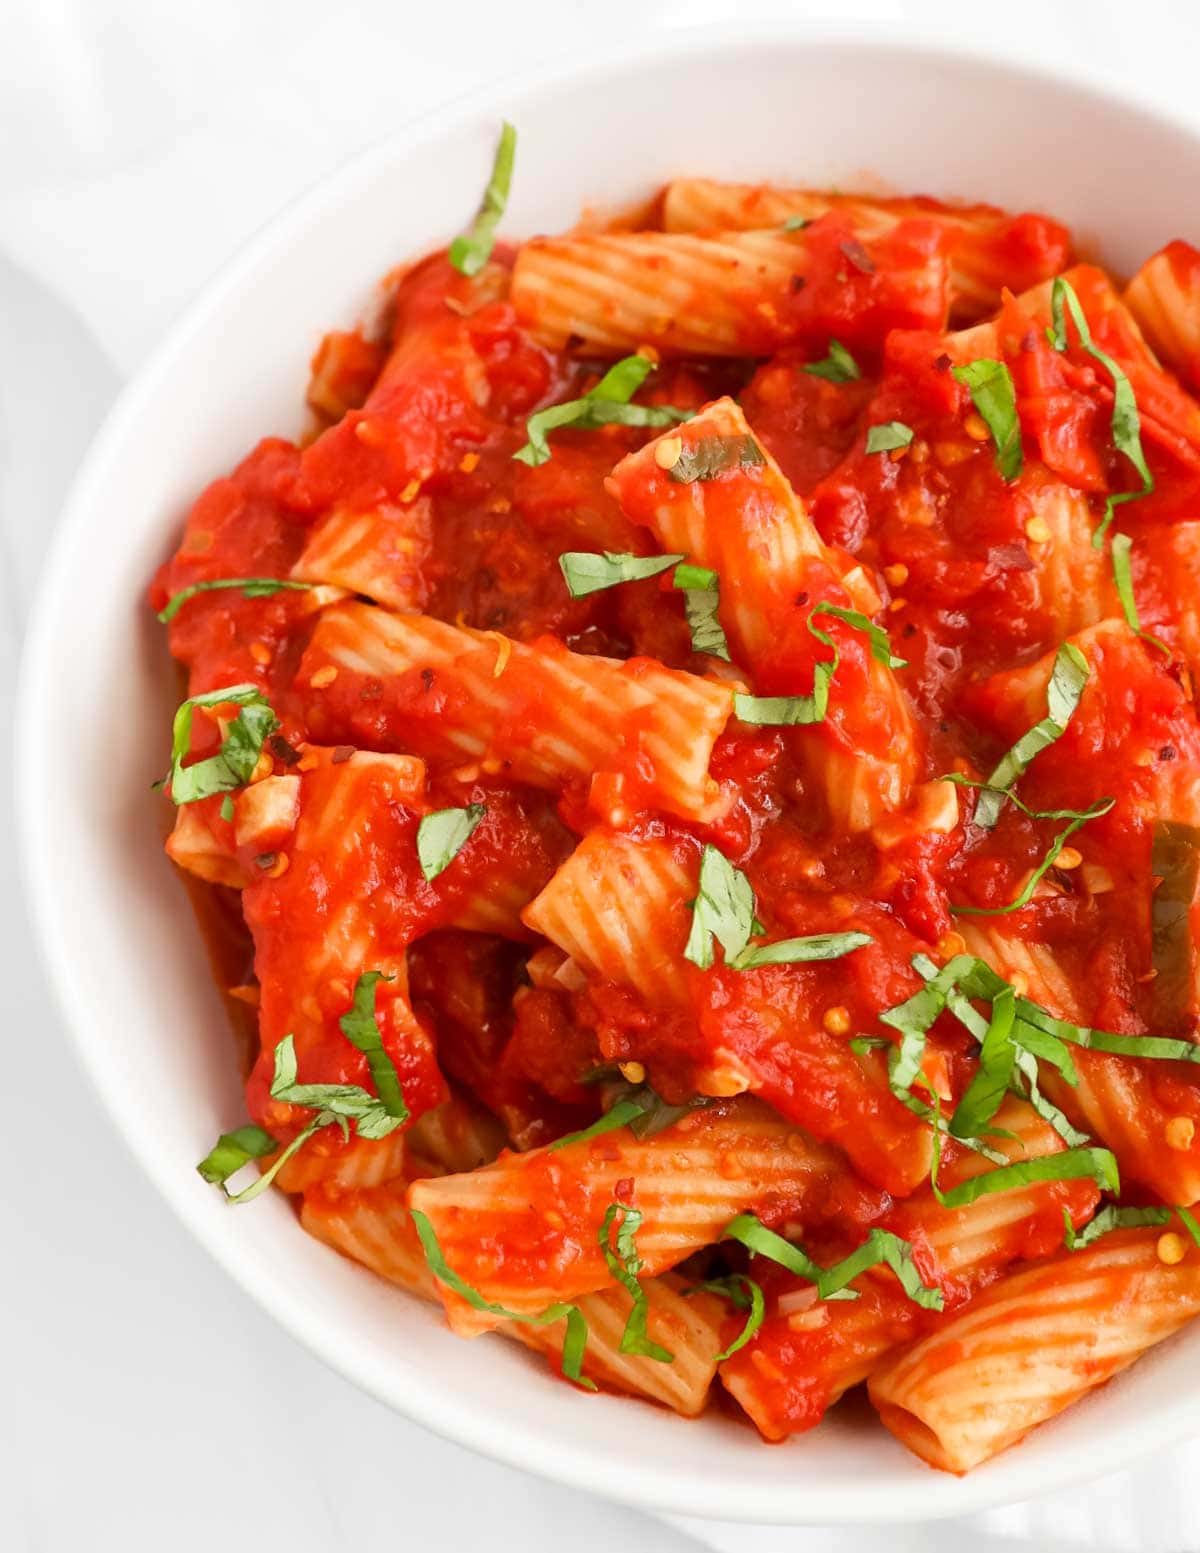 A close up picture of pasta in a red sauce that has chopped basil on top.